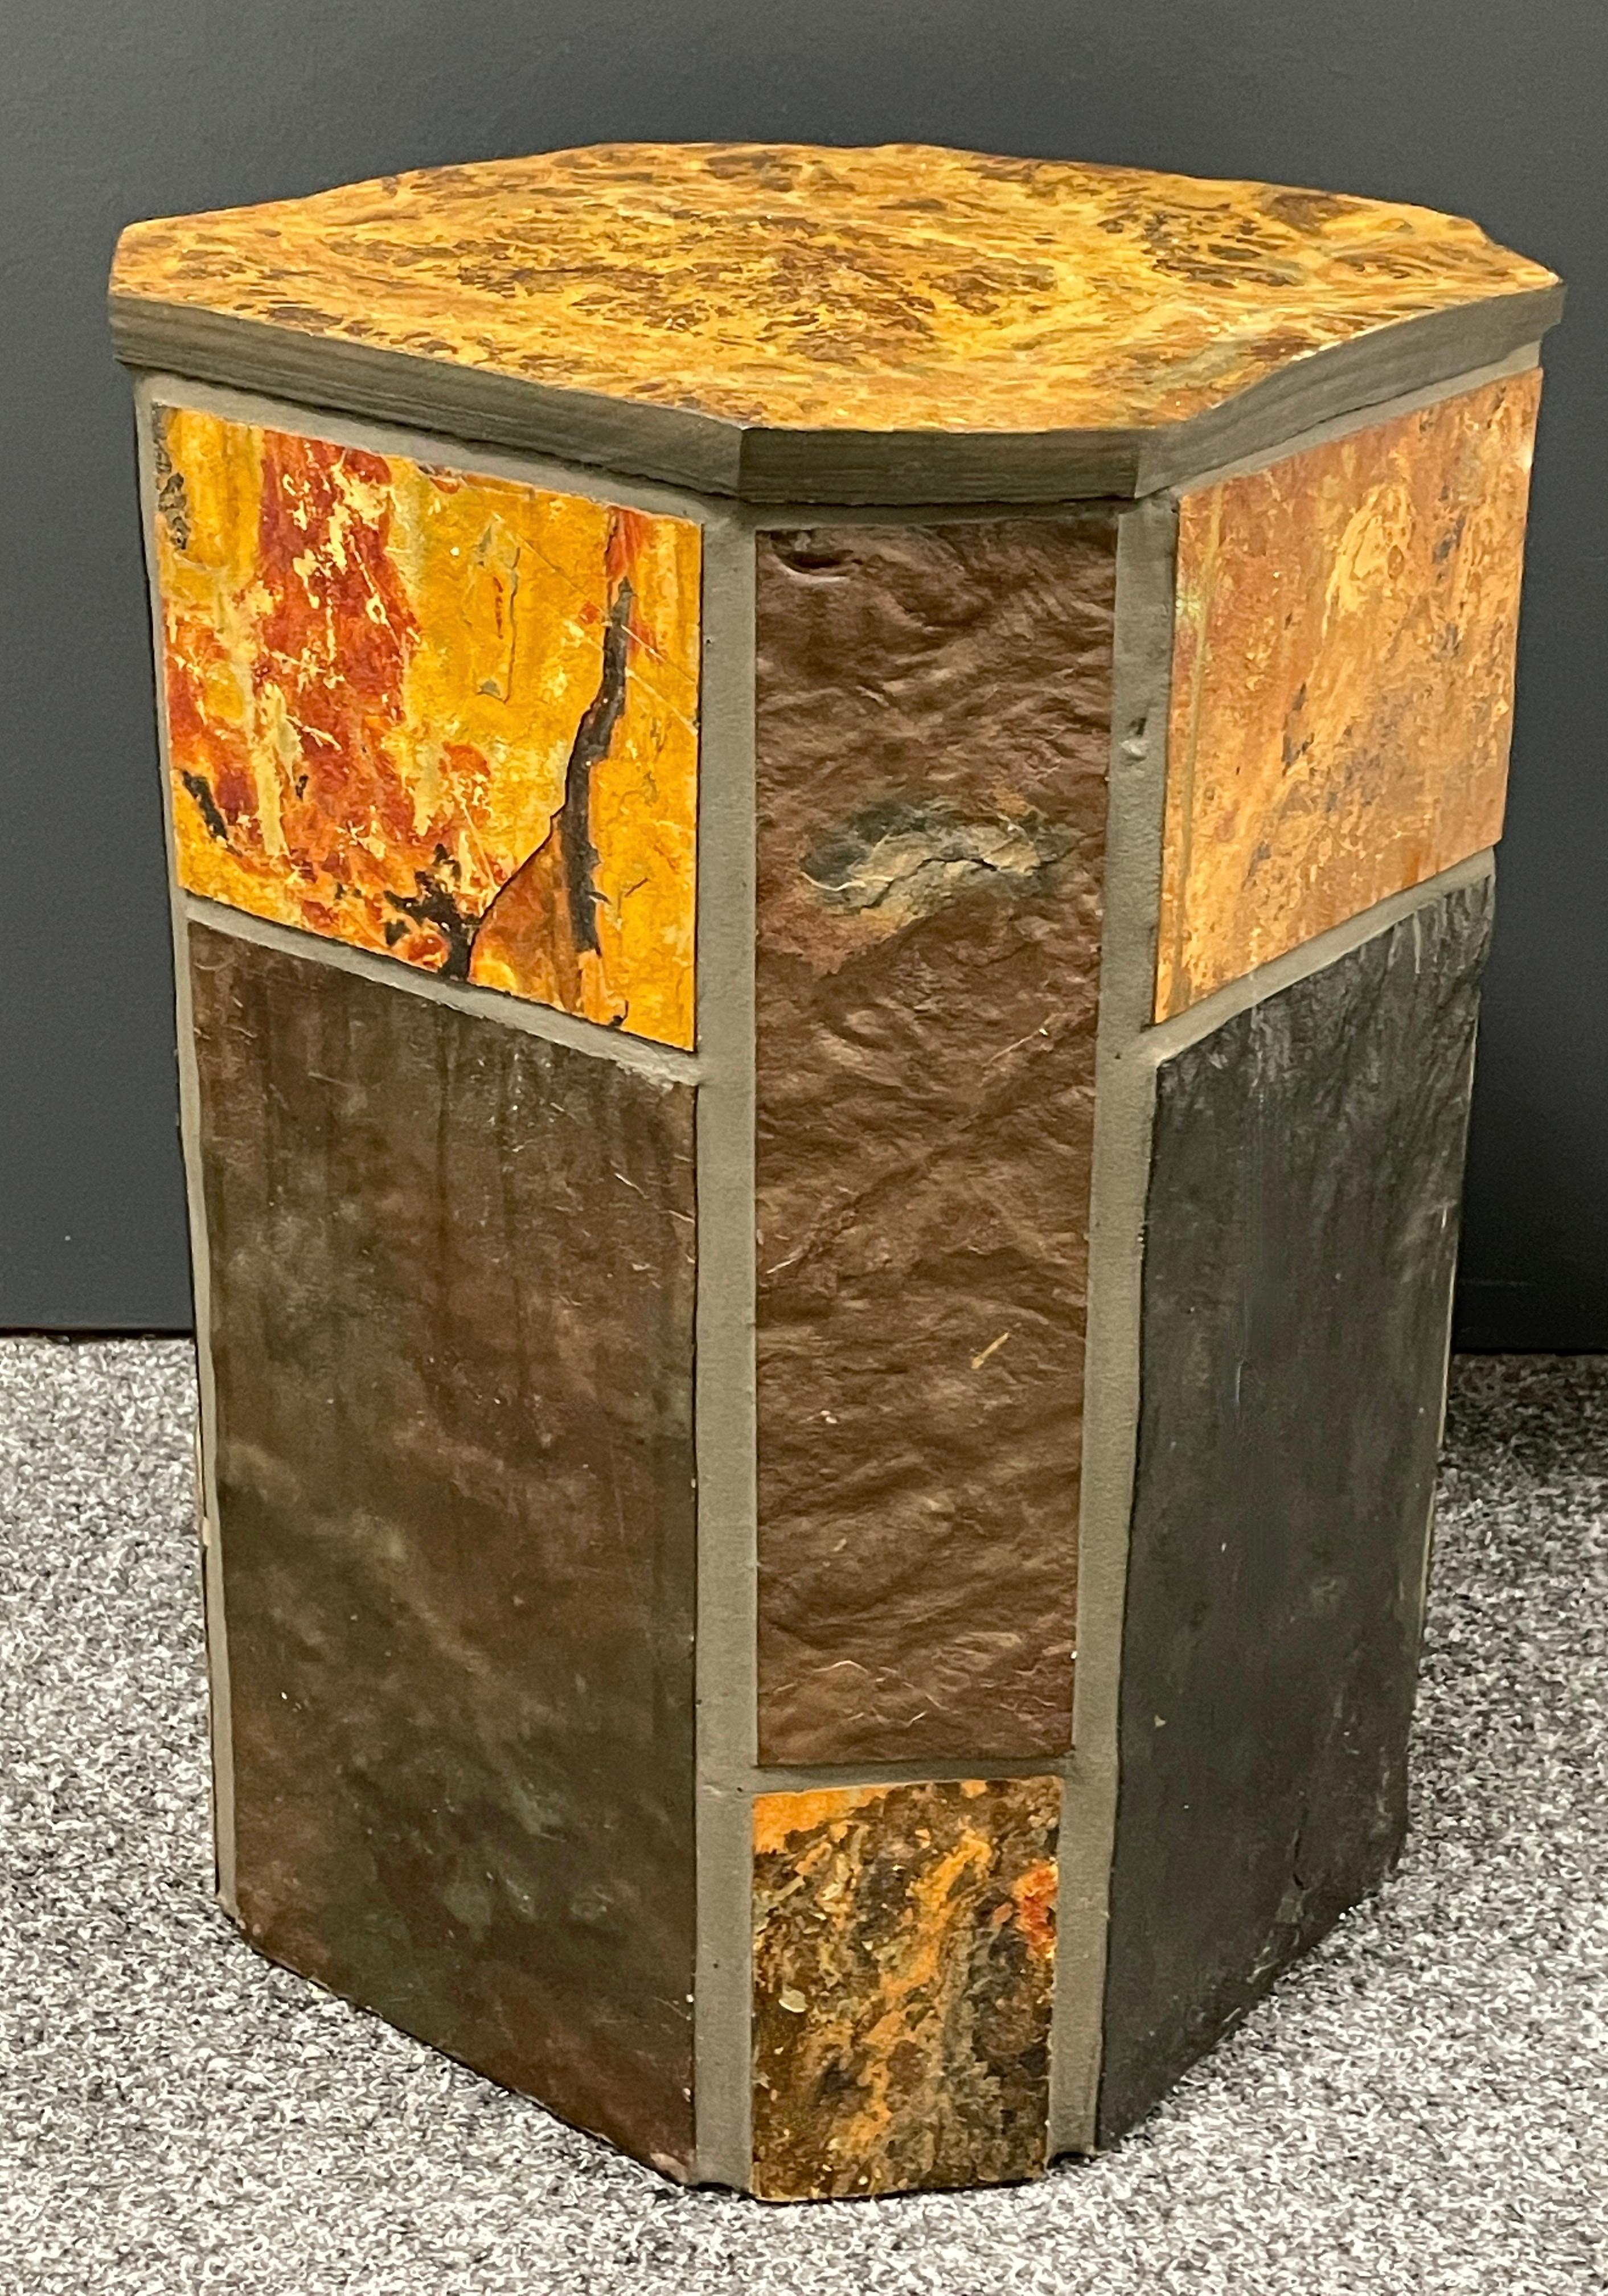 Offered is this beautiful rare Brutalist octagonal shaped pedestal, made in the 1960s. A 